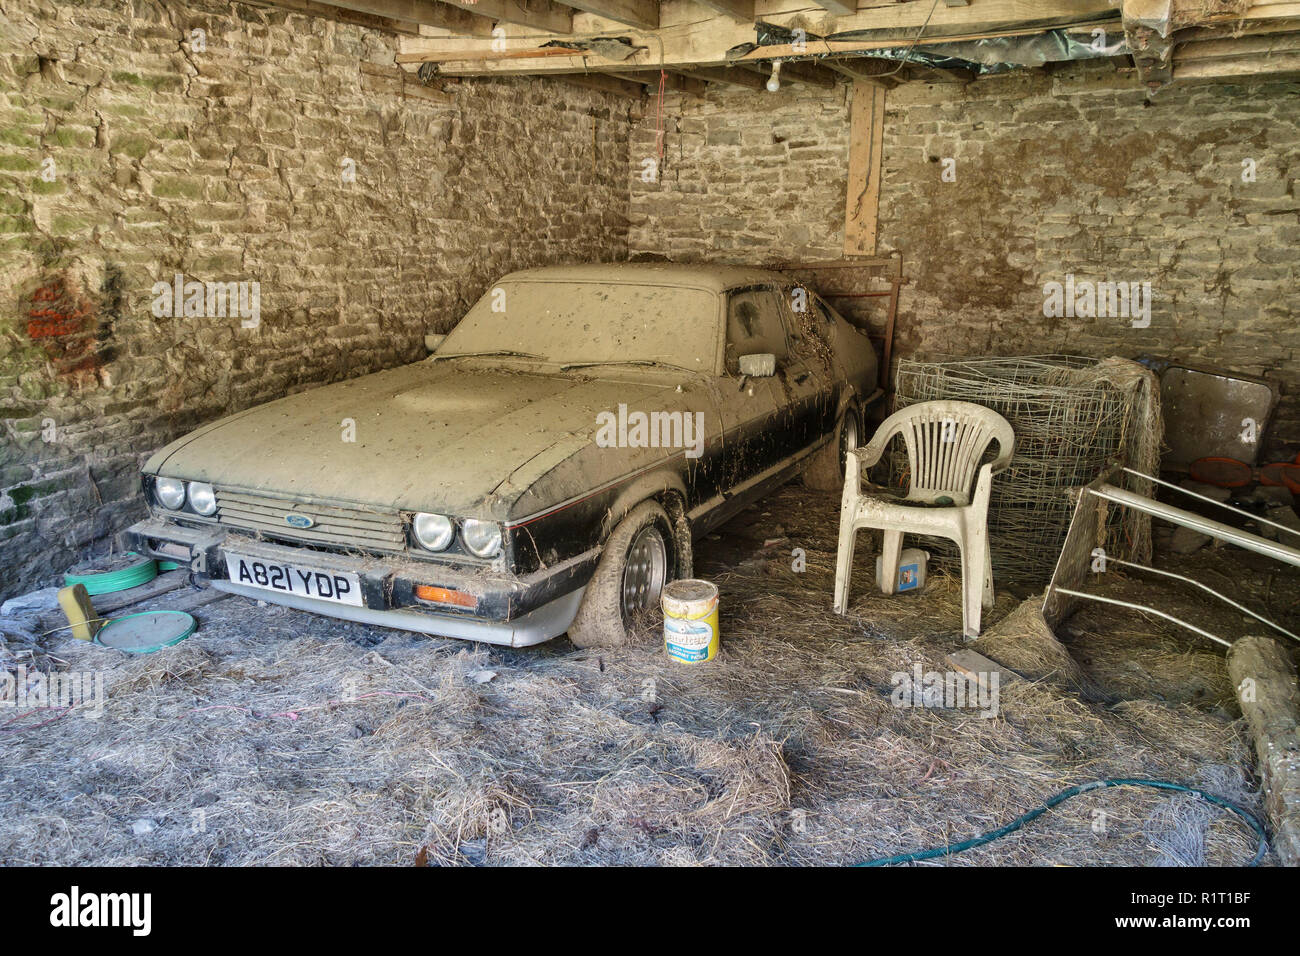 A 1983 Ford Capri 2.8 found stored in a rural barn awaiting restoration (UK) Stock Photo